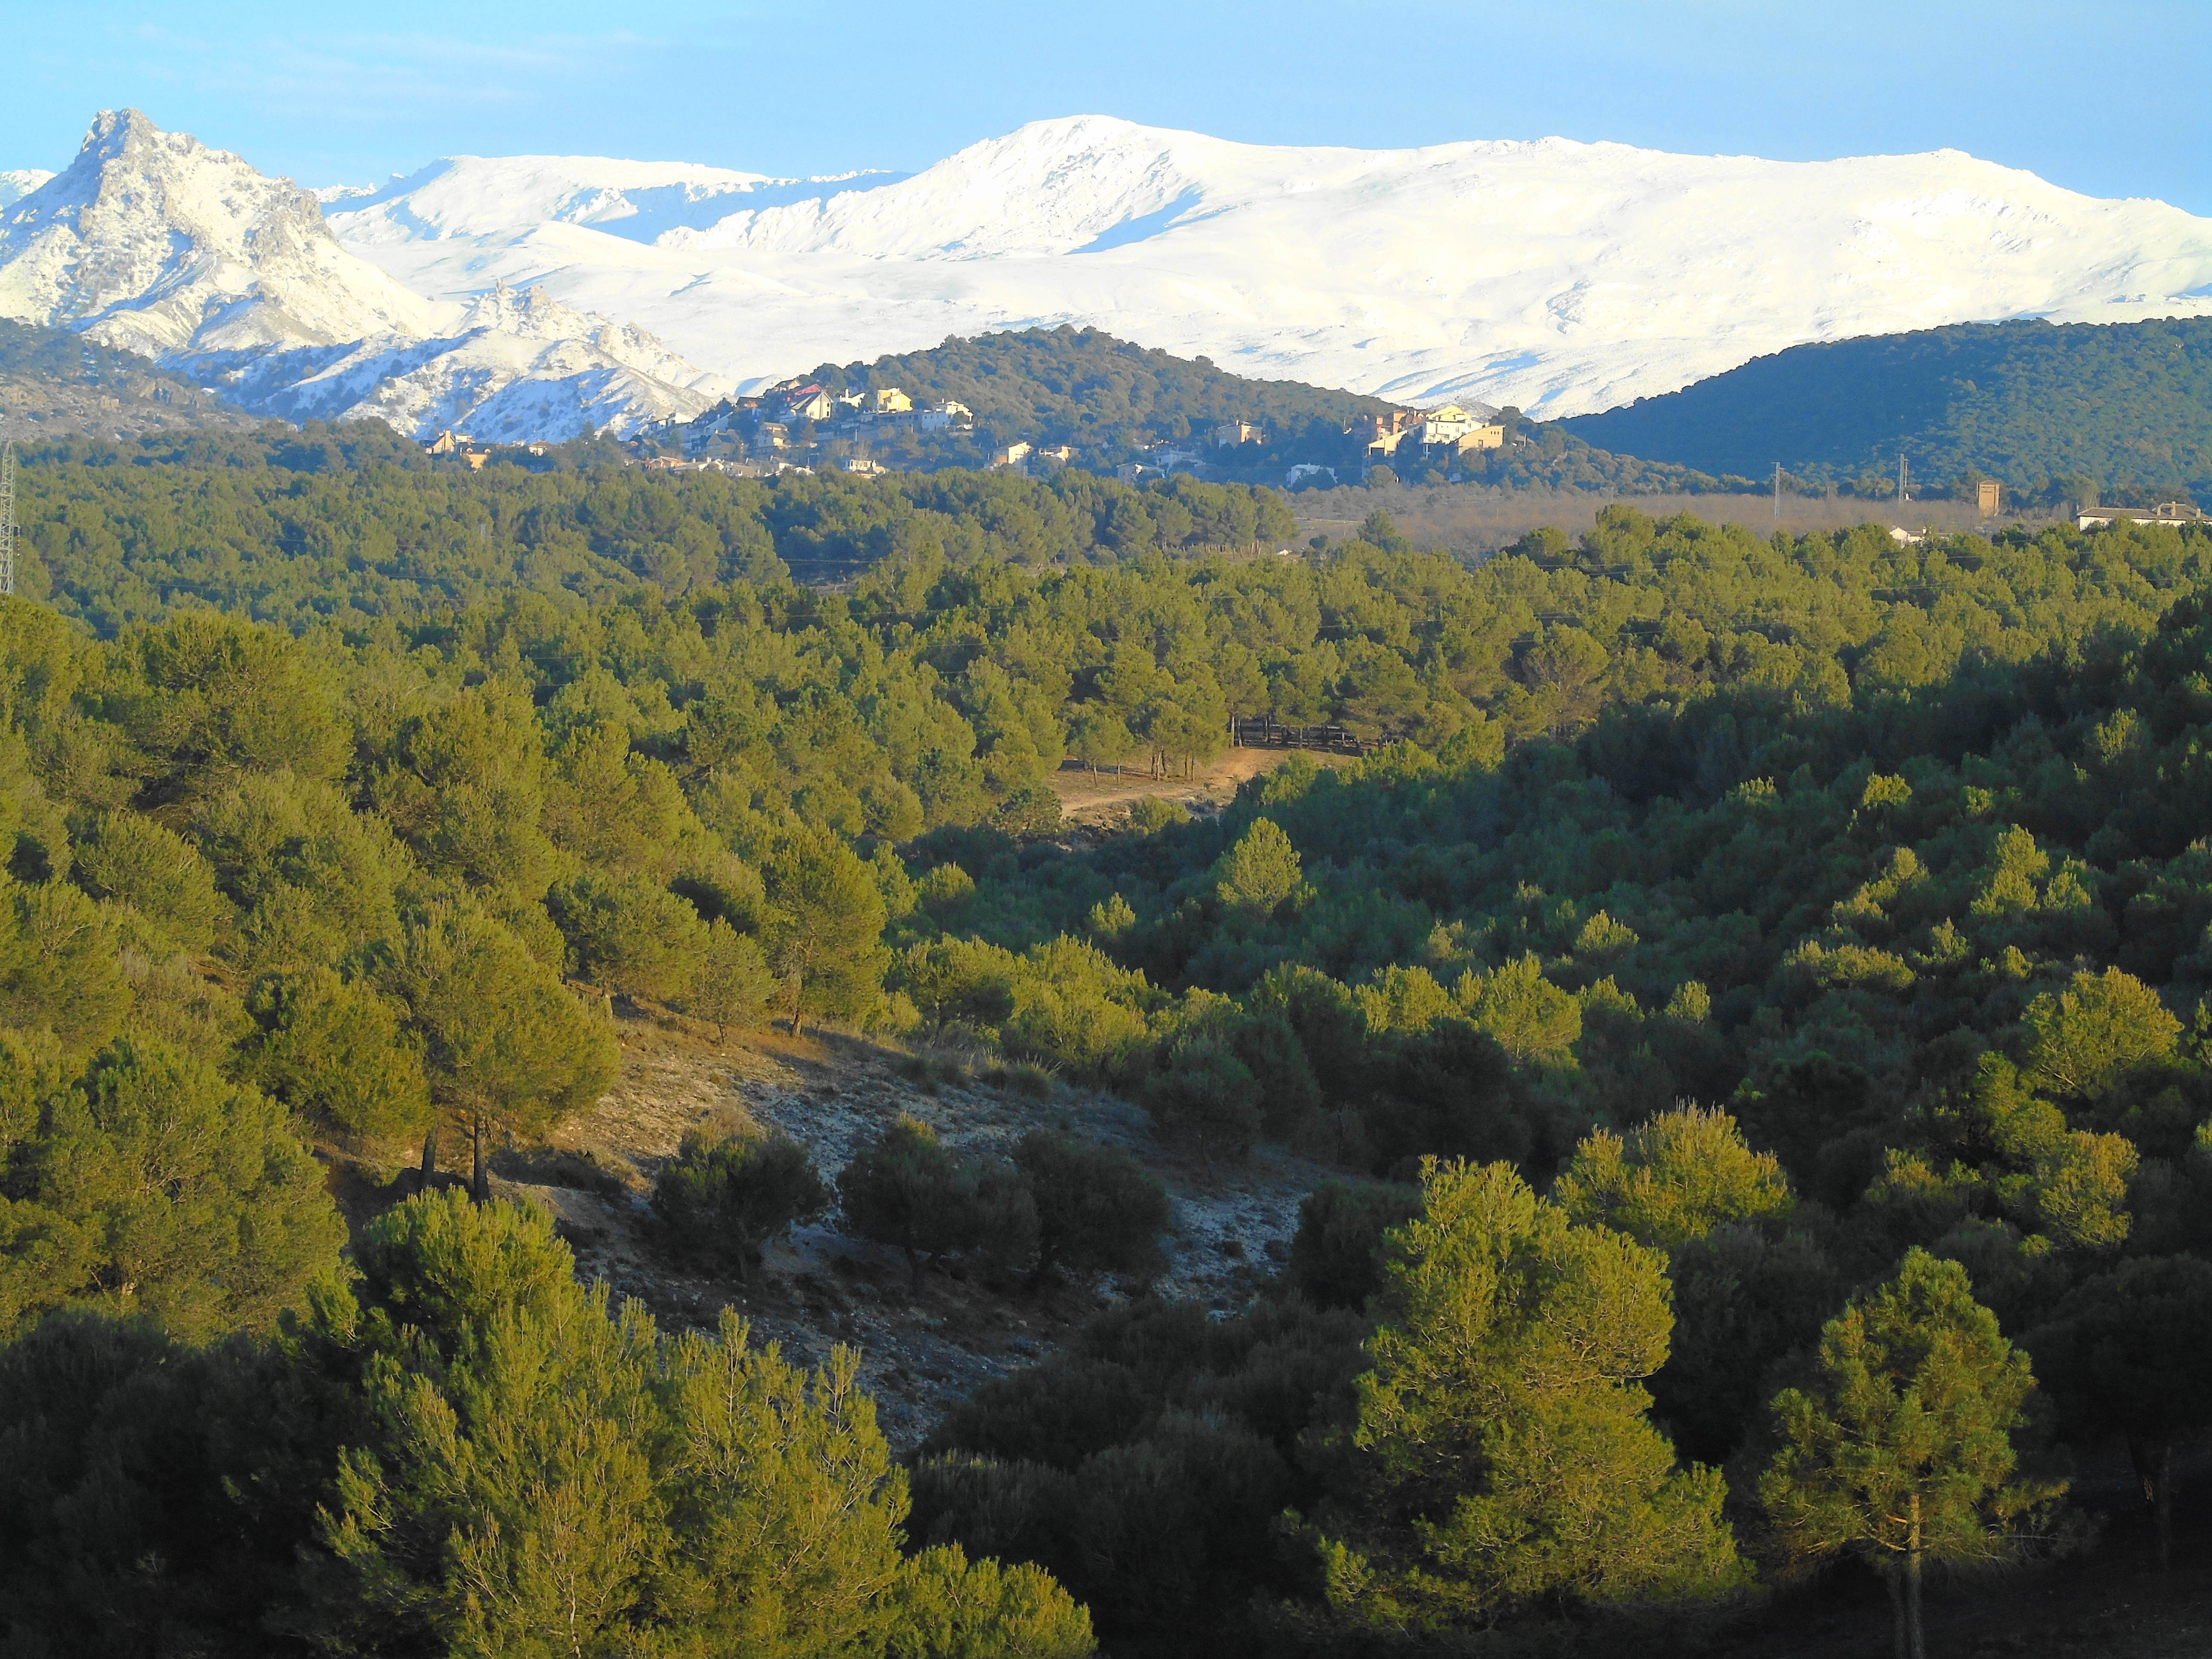 View of the locality where we are, from the town of La Zubia, 4 km away